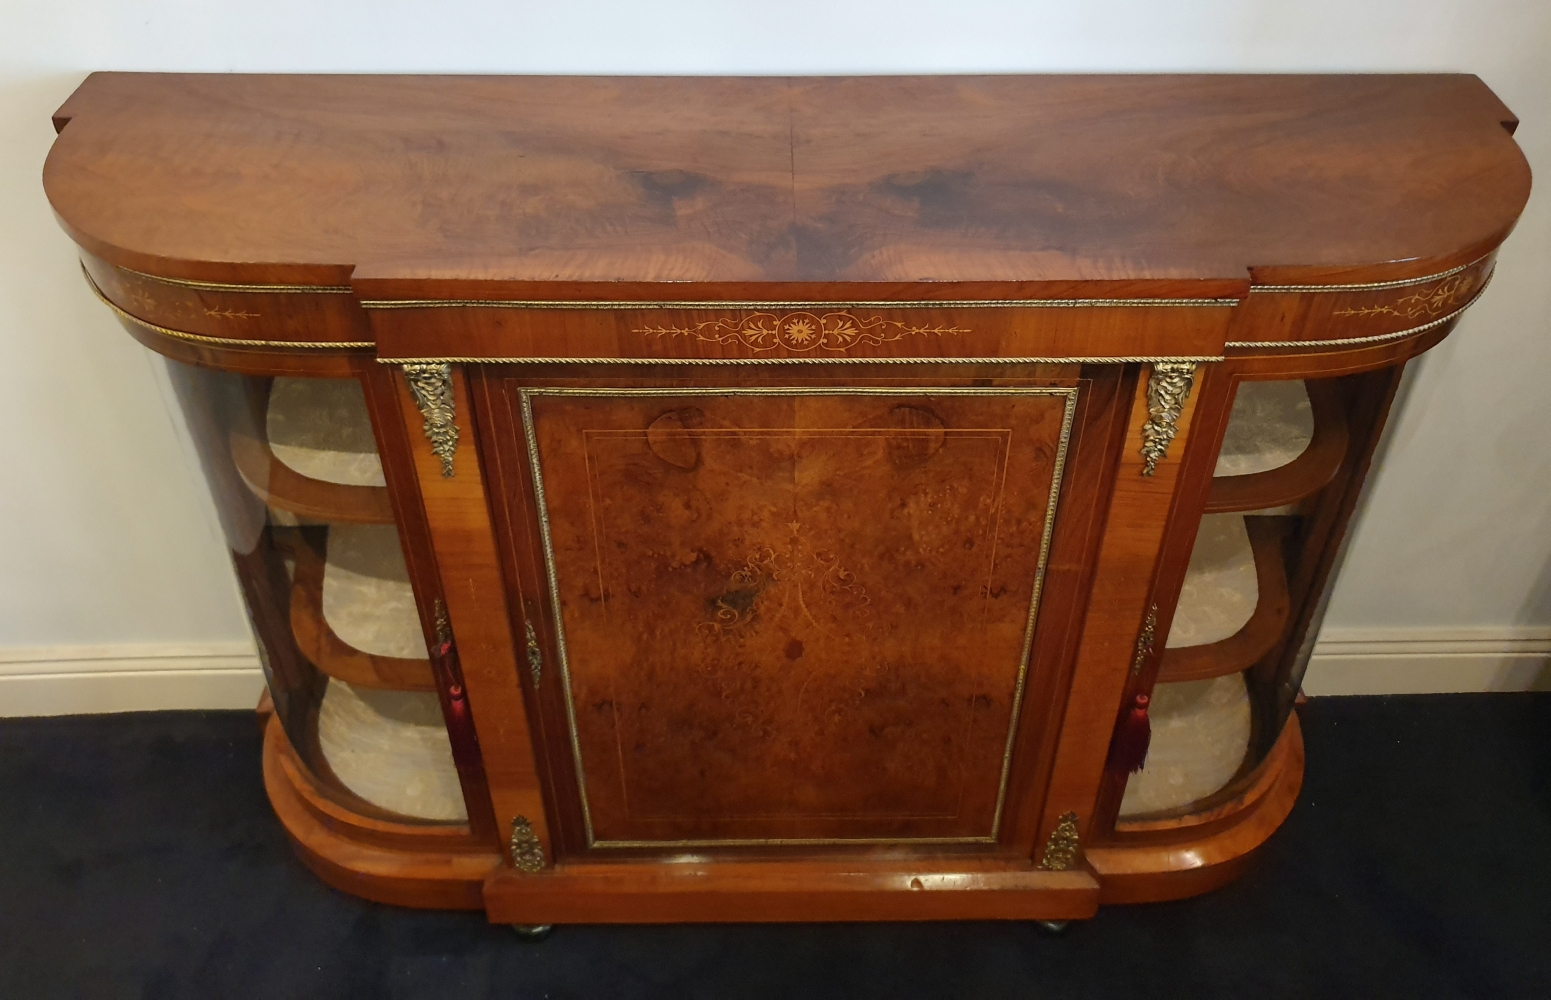 A STUNNING 19TH CENTURY BURR WALNUT CREDENZA, circa 1860, with beautiful burr walnut and good qualit - Image 3 of 3